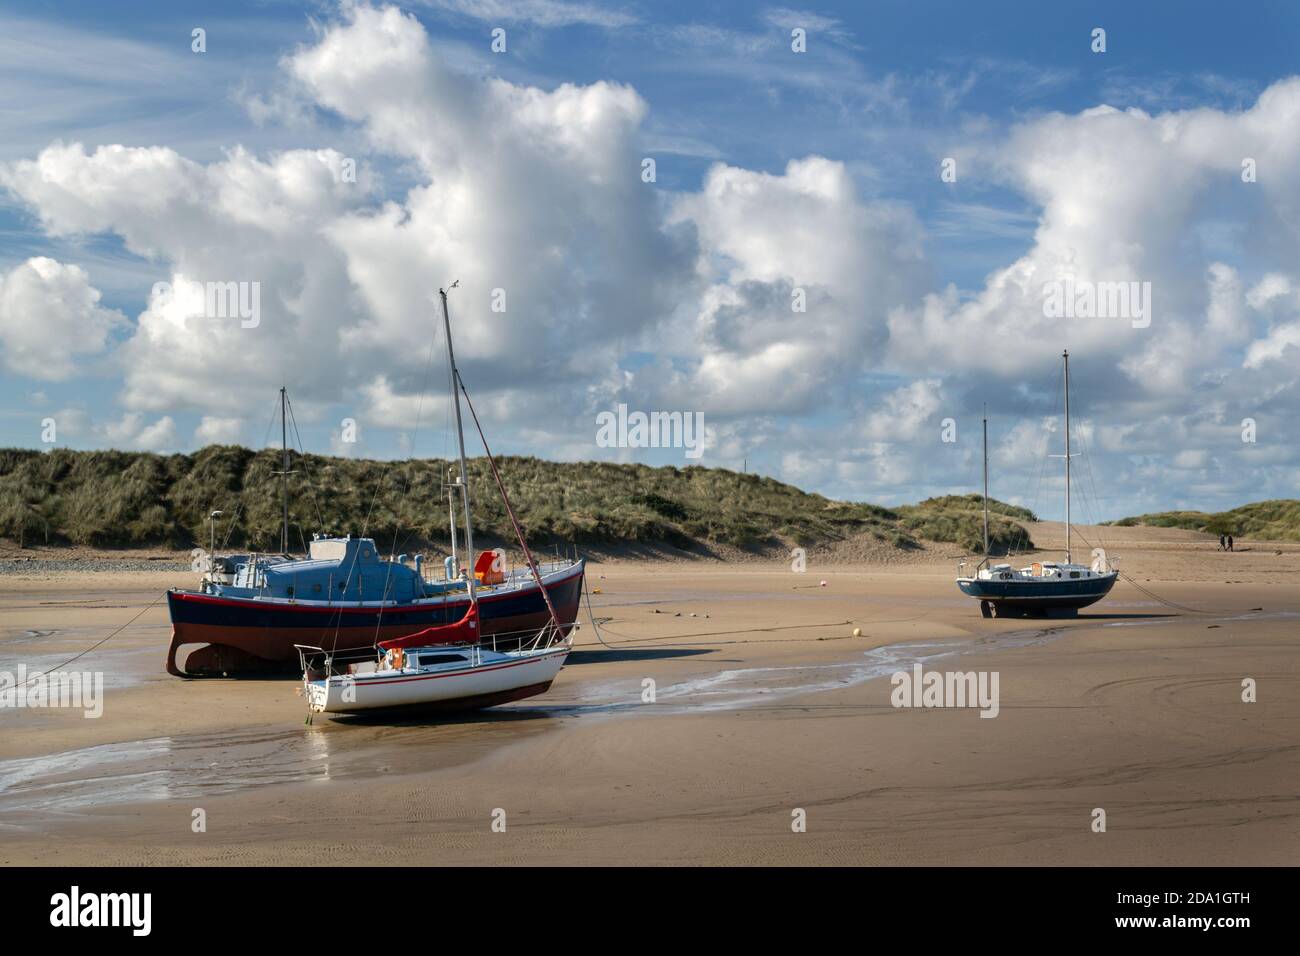 BARMOUTH, WALES - october 1st, 2020: Three boats in the Estuary of the river Mawddach, Barmouth, Wales, County of Gwynedd on a sunny autumn afternoon Stock Photo